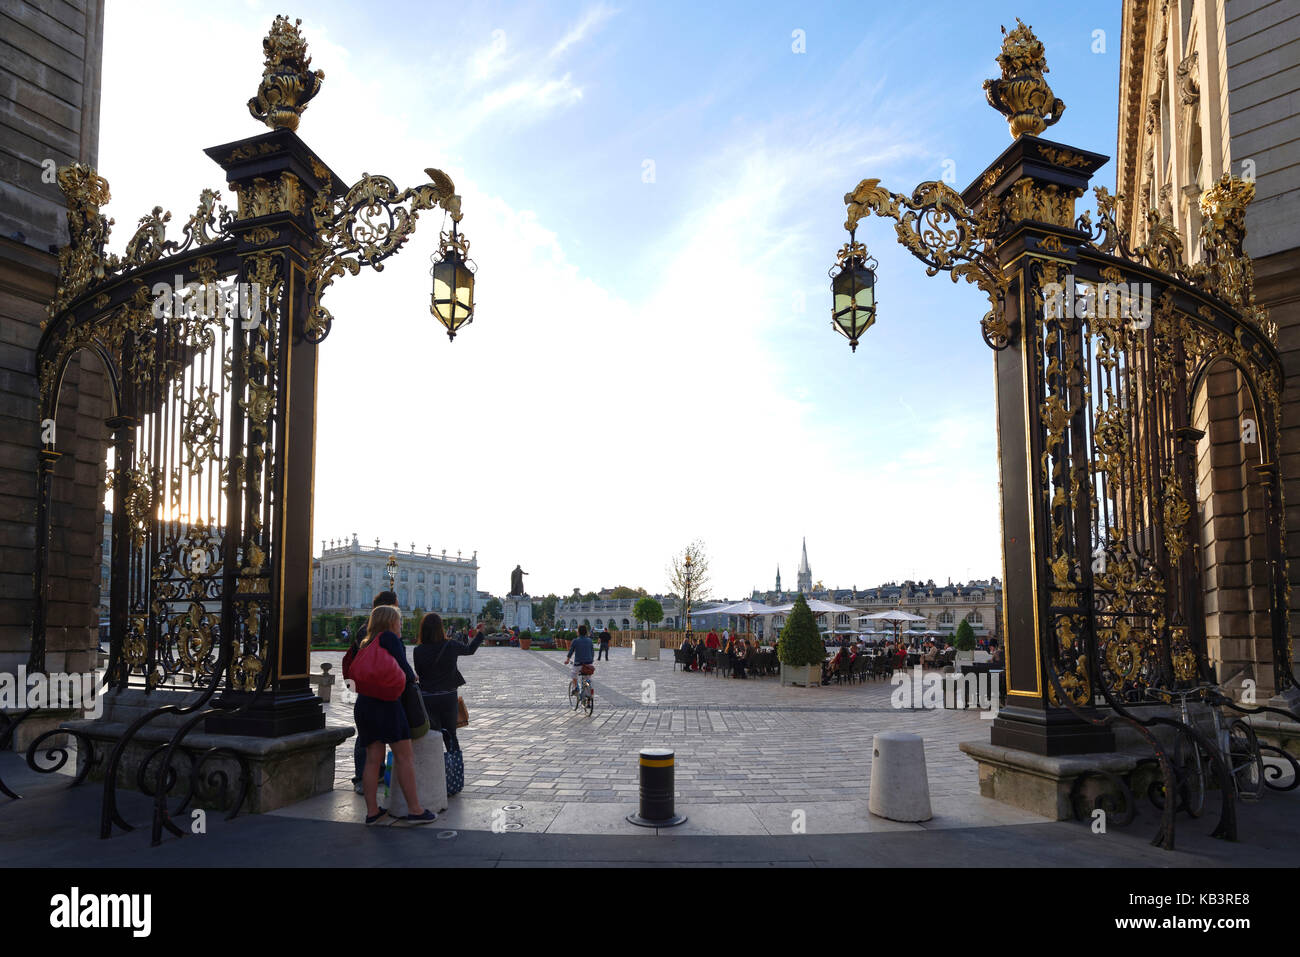 France, Meurthe et Moselle, Nancy, Place Stanislas (former Place Royale) built by Stanislas Leszczynski in the 18th century, classifed as World Heritage by UNESCO, golden gate by Jean Lamour Stock Photo